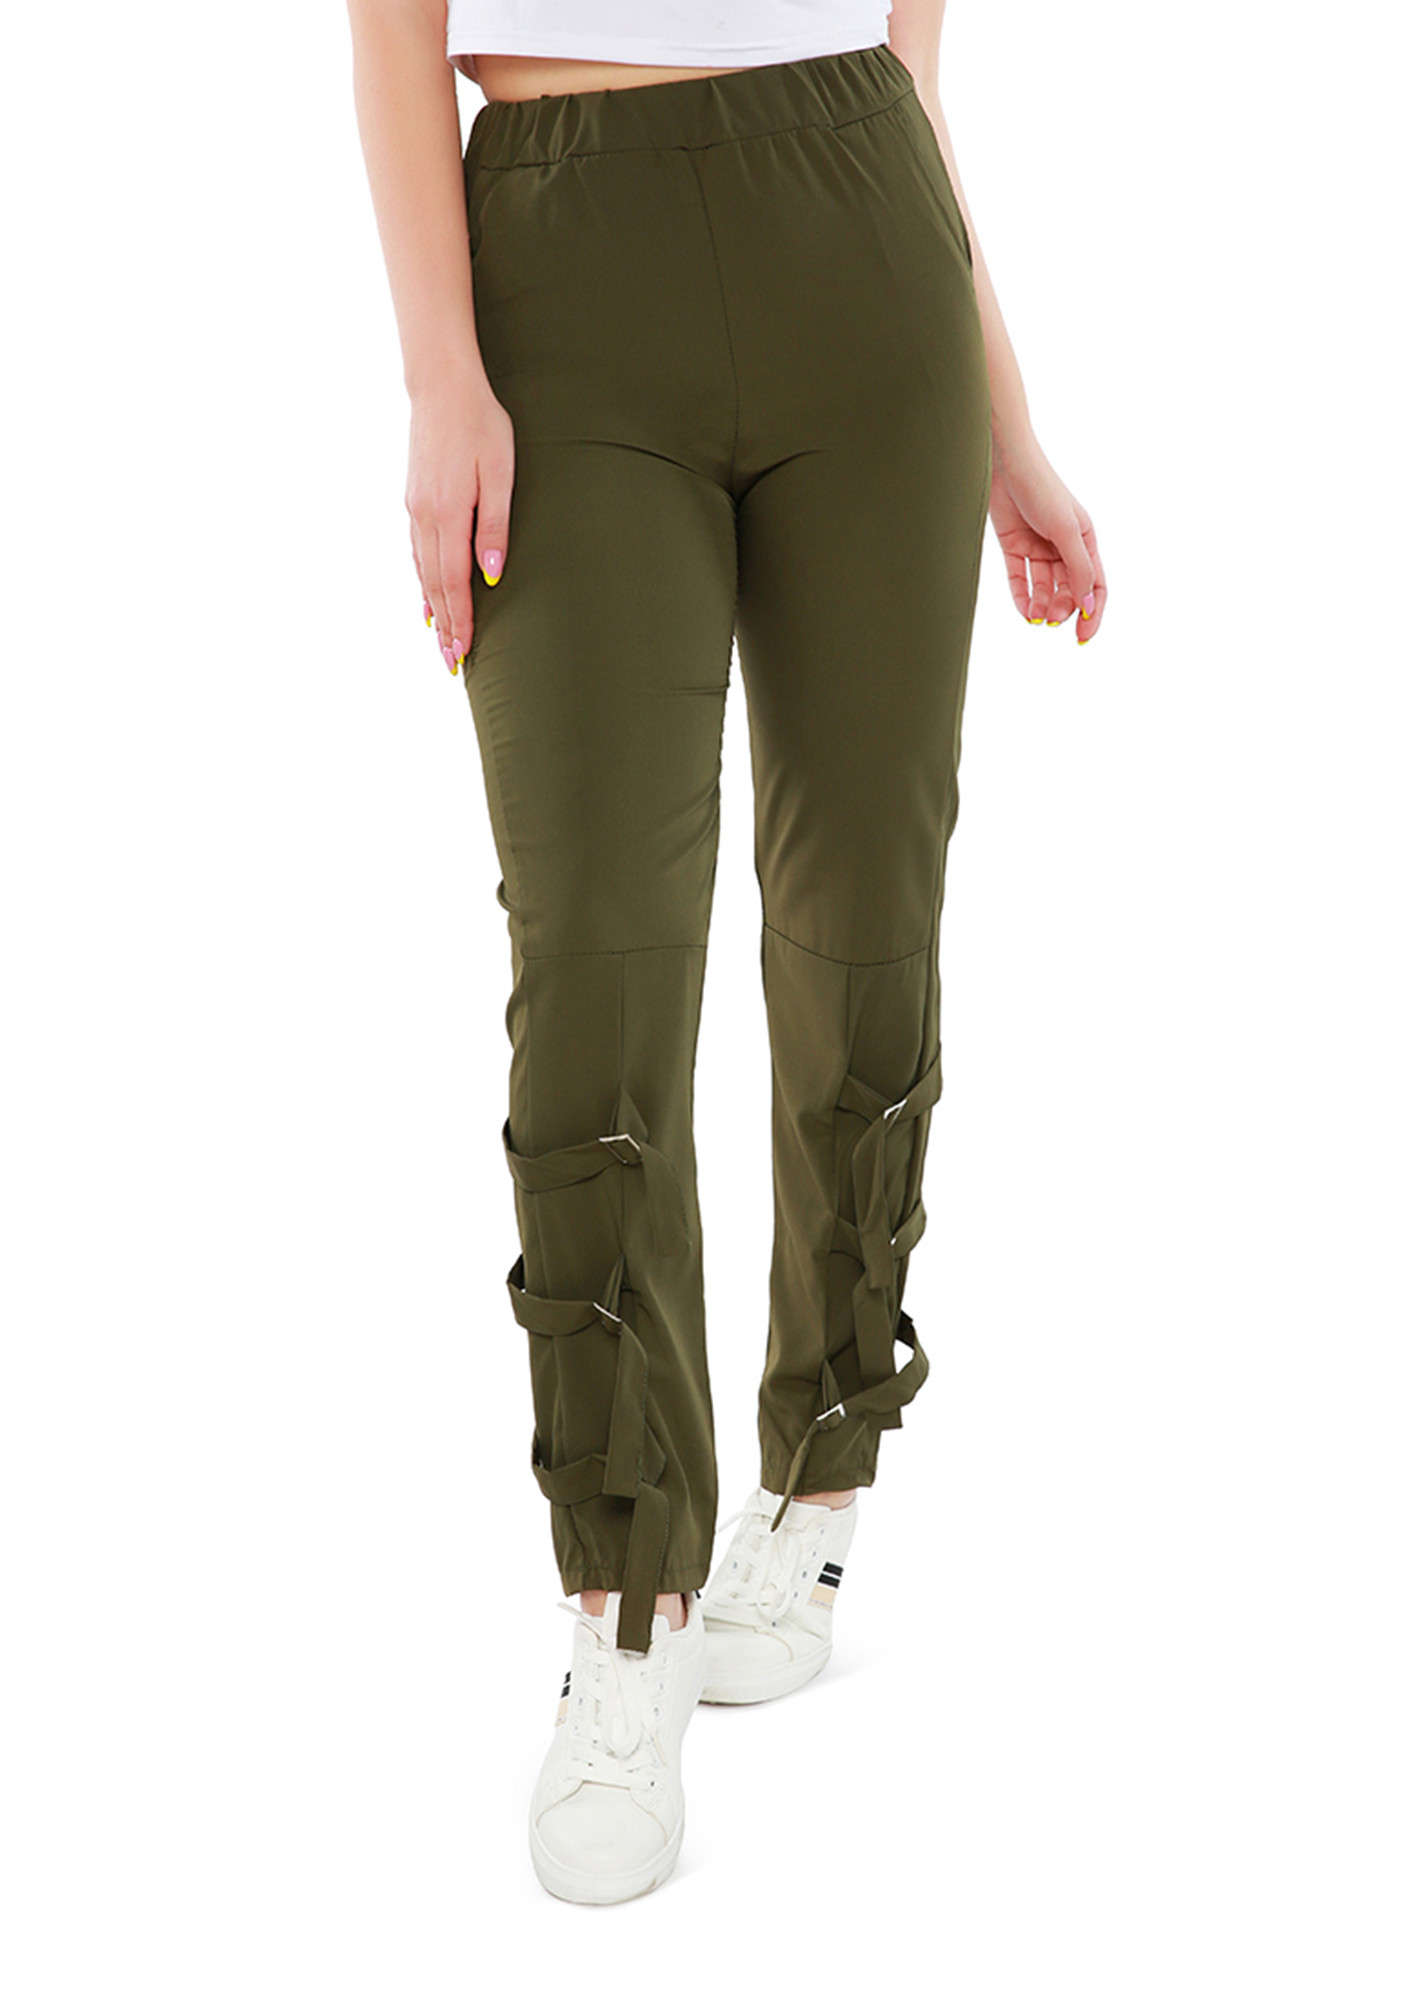 KAZO Trousers and Pants  Buy KAZO Brown Trouser With Metal Buckle Online   Nykaa Fashion